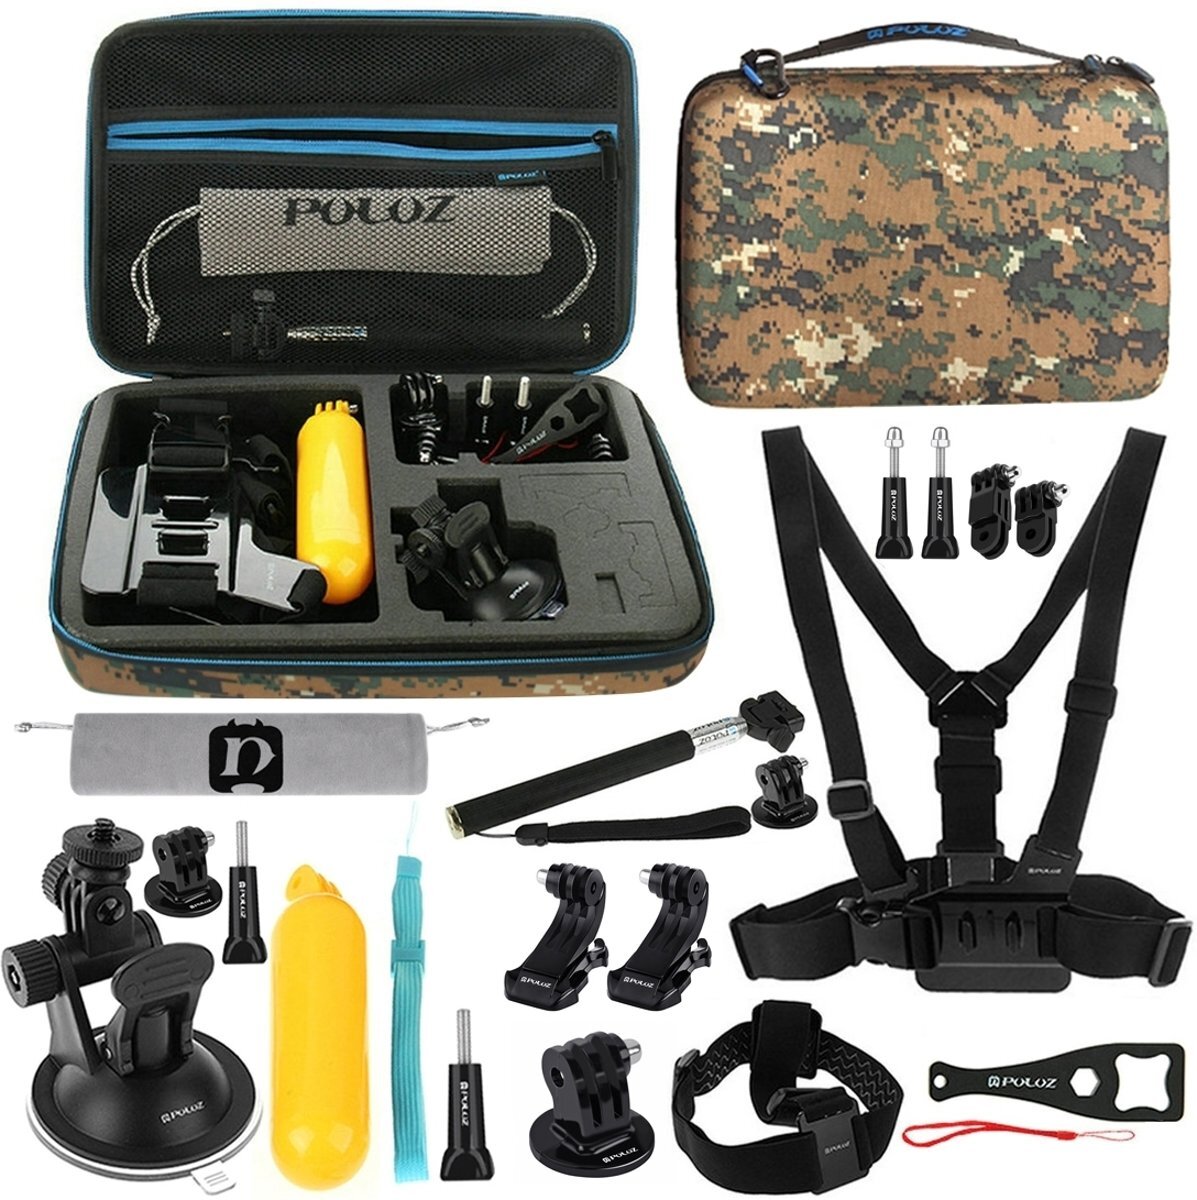 www.puluz.nl 20 in 1 GoPro accessoire camouflage combo kit voor GoPro HERO 6 / 5 / 4 Session / 4 / 3+ / 3 / 2 / 1